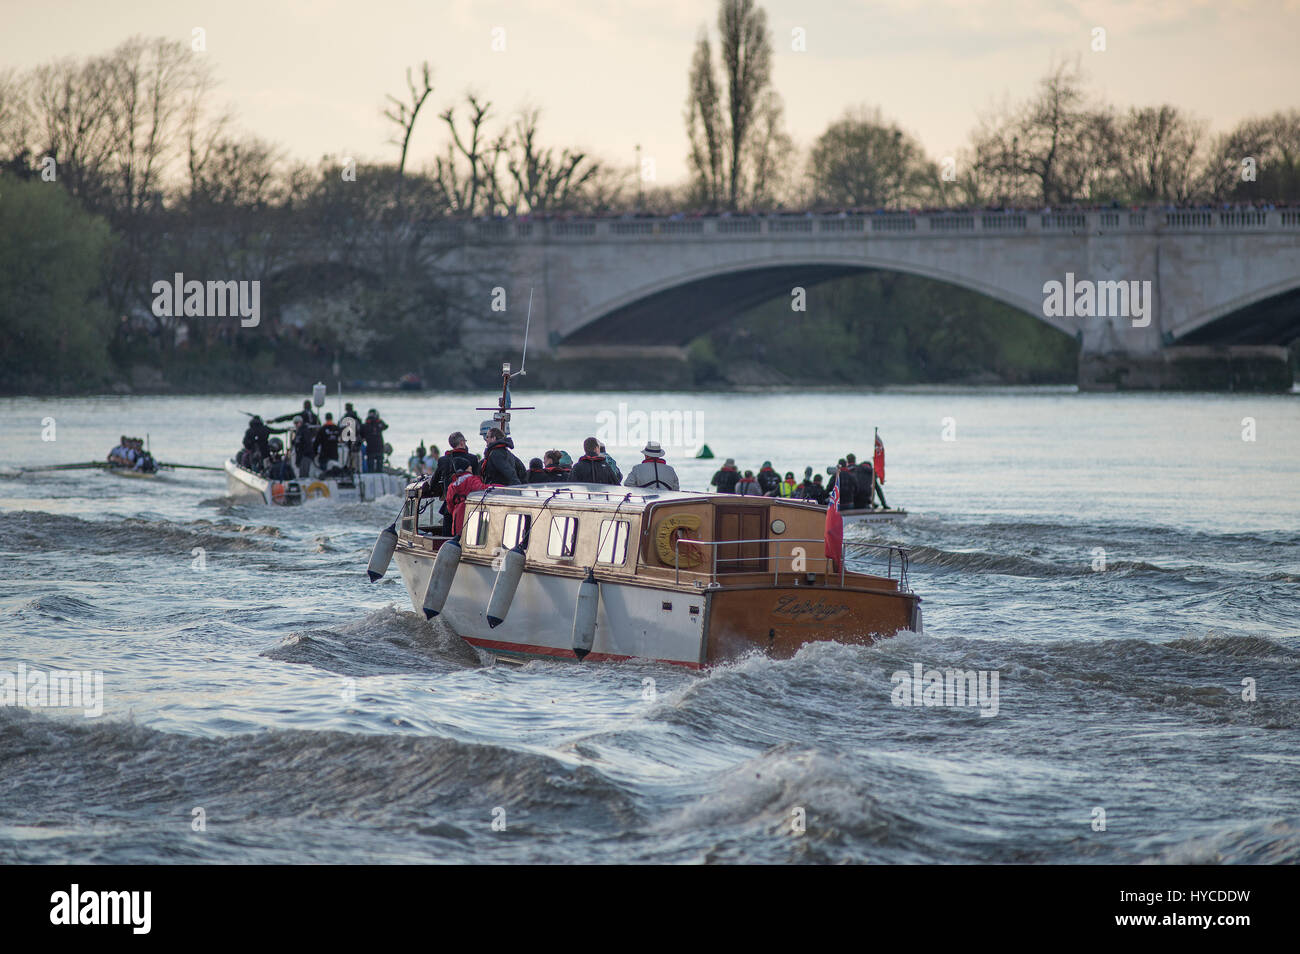 Chase-Boote folgen den Rennteams in Richtung Finish The Cancer Research UK Boat Race 2017 in Mortlake, 2. April 2017, London, UK Stockfoto